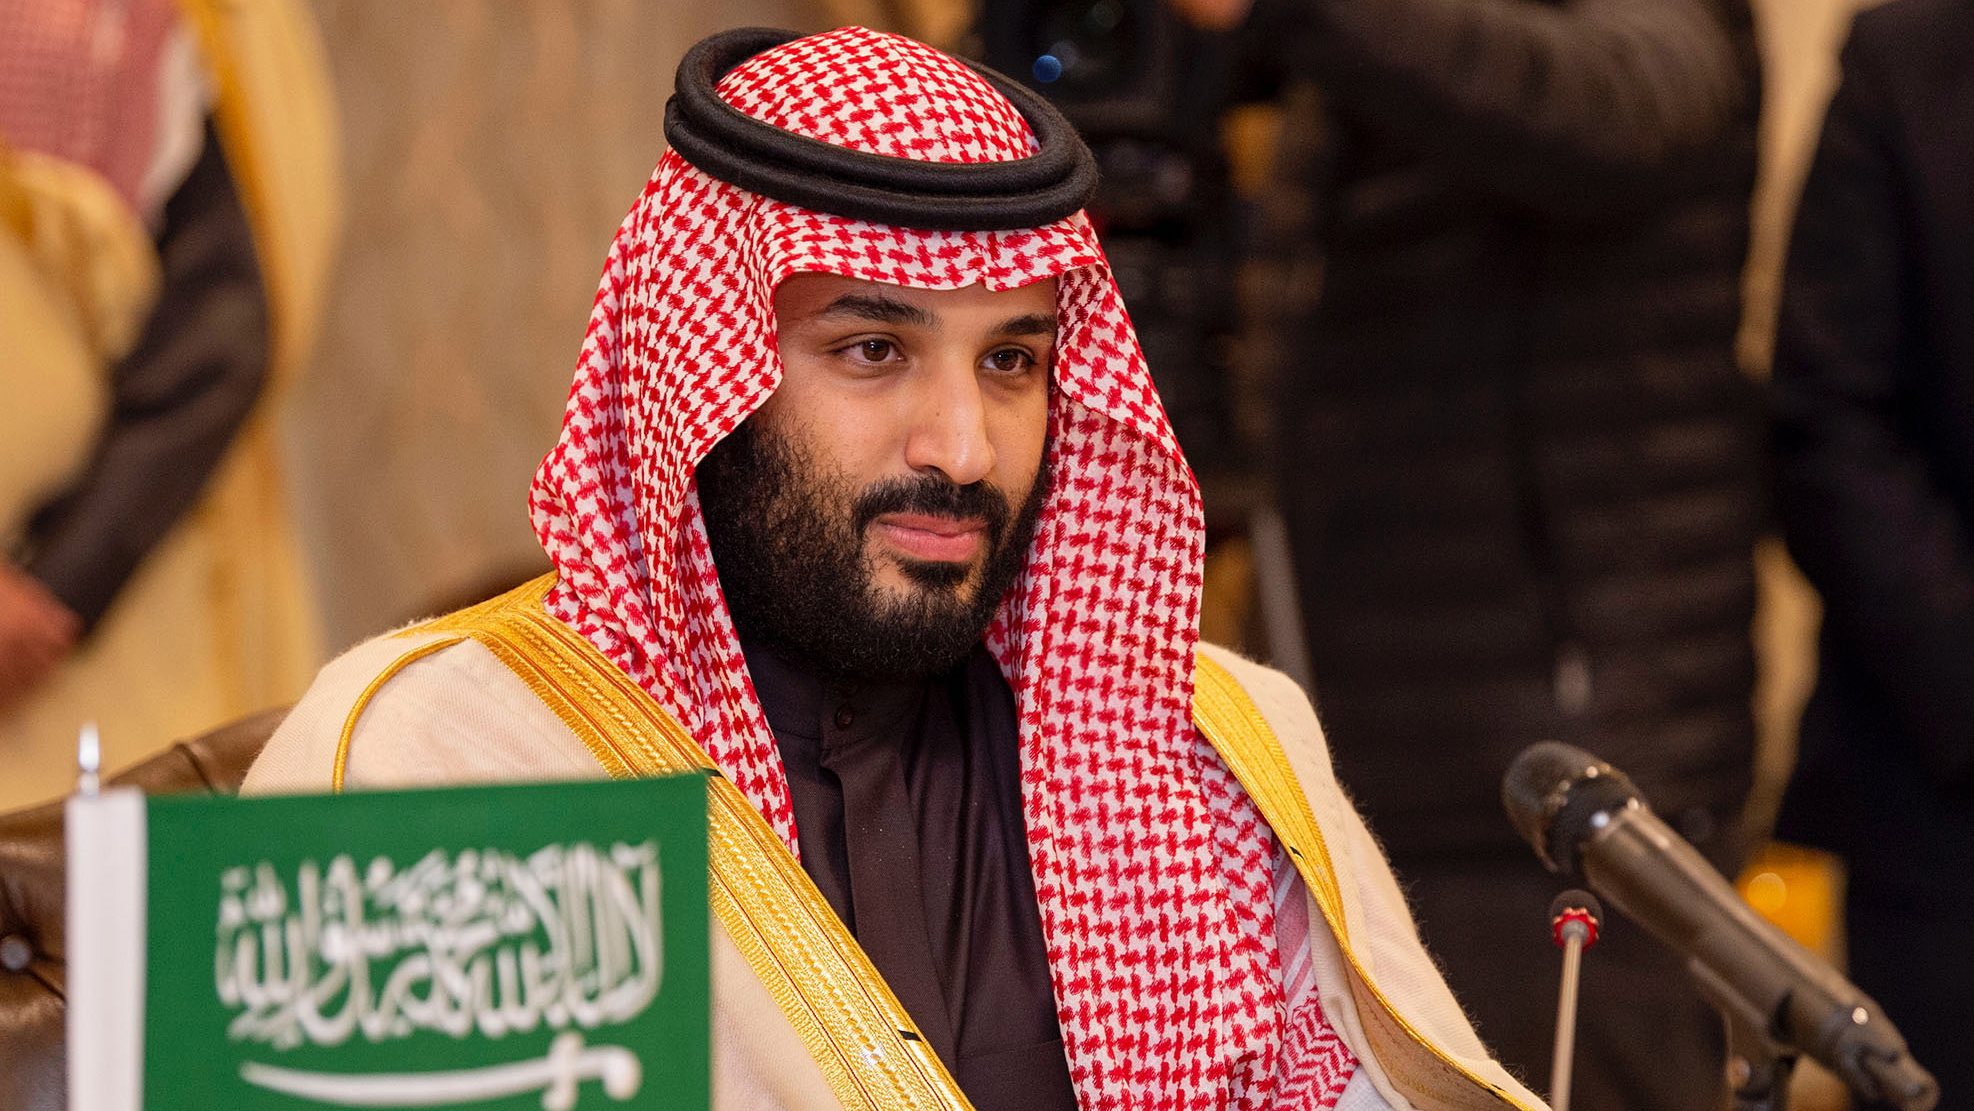 epa07378545 A handout photo made available by the Saudi Royal Court shows Saudi Crown Prince Mohammad Bin Salman attending a meeting in Islamabad, Pakistan, 17 February 2019 (issued 18 February 2019). The crown prince of Saudi Arabia arrived on 17 February in Pakistan, where he is expected to announce multi-billion-dollar investments to help the kingdom&#039;s traditional ally tide over financial crisis amid declining foreign exchange reserves.  EPA/BANDAR ALGALOUD HANDOUT  HANDOUT EDITORIAL USE ONLY/NO SALES